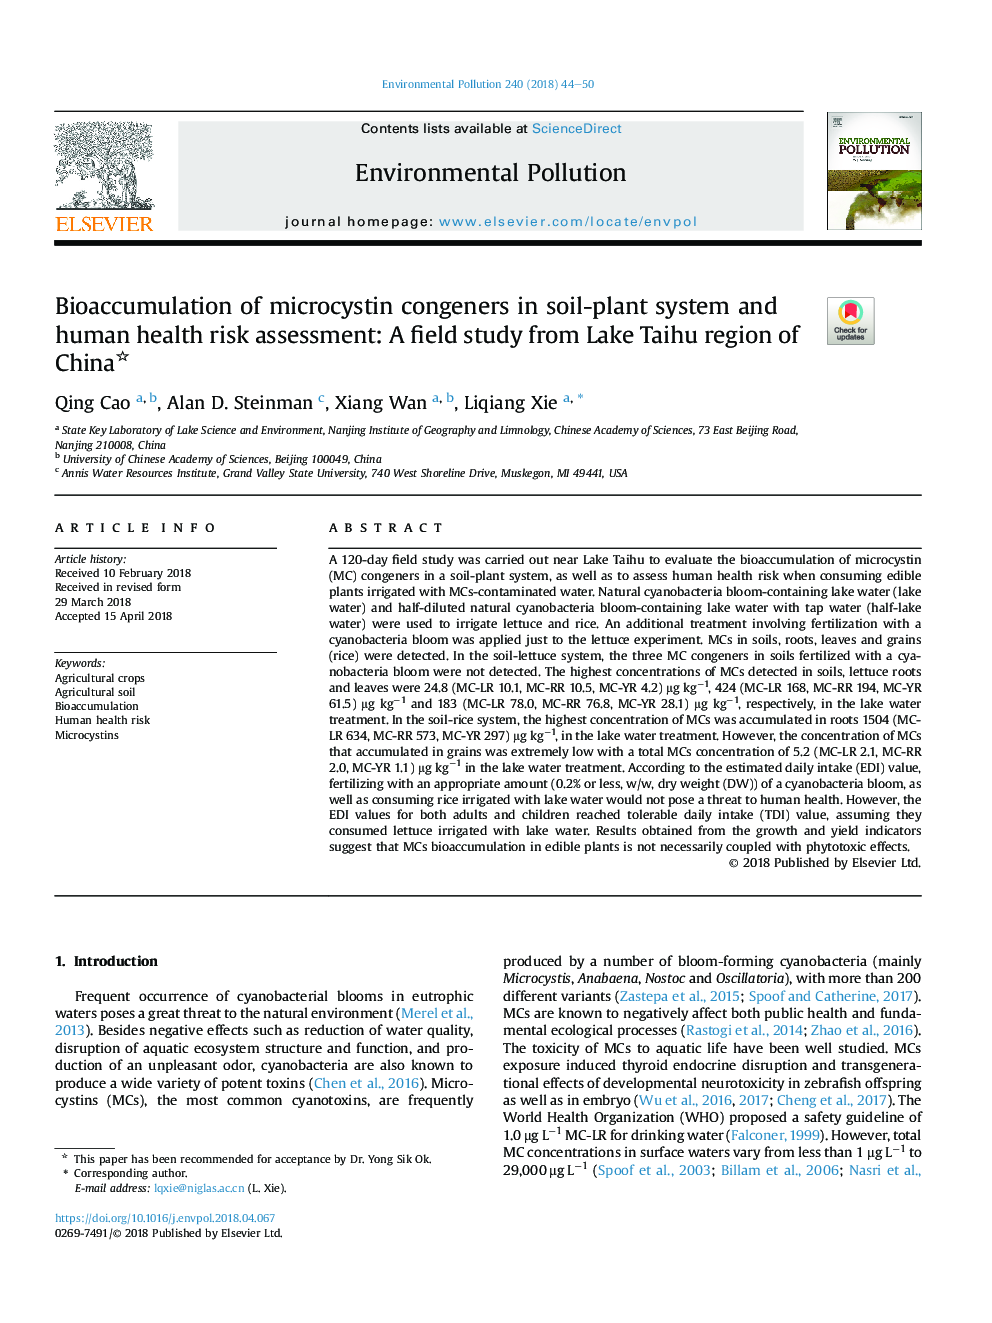 Bioaccumulation of microcystin congeners in soil-plant system and human health risk assessment: A field study from Lake Taihu region of China